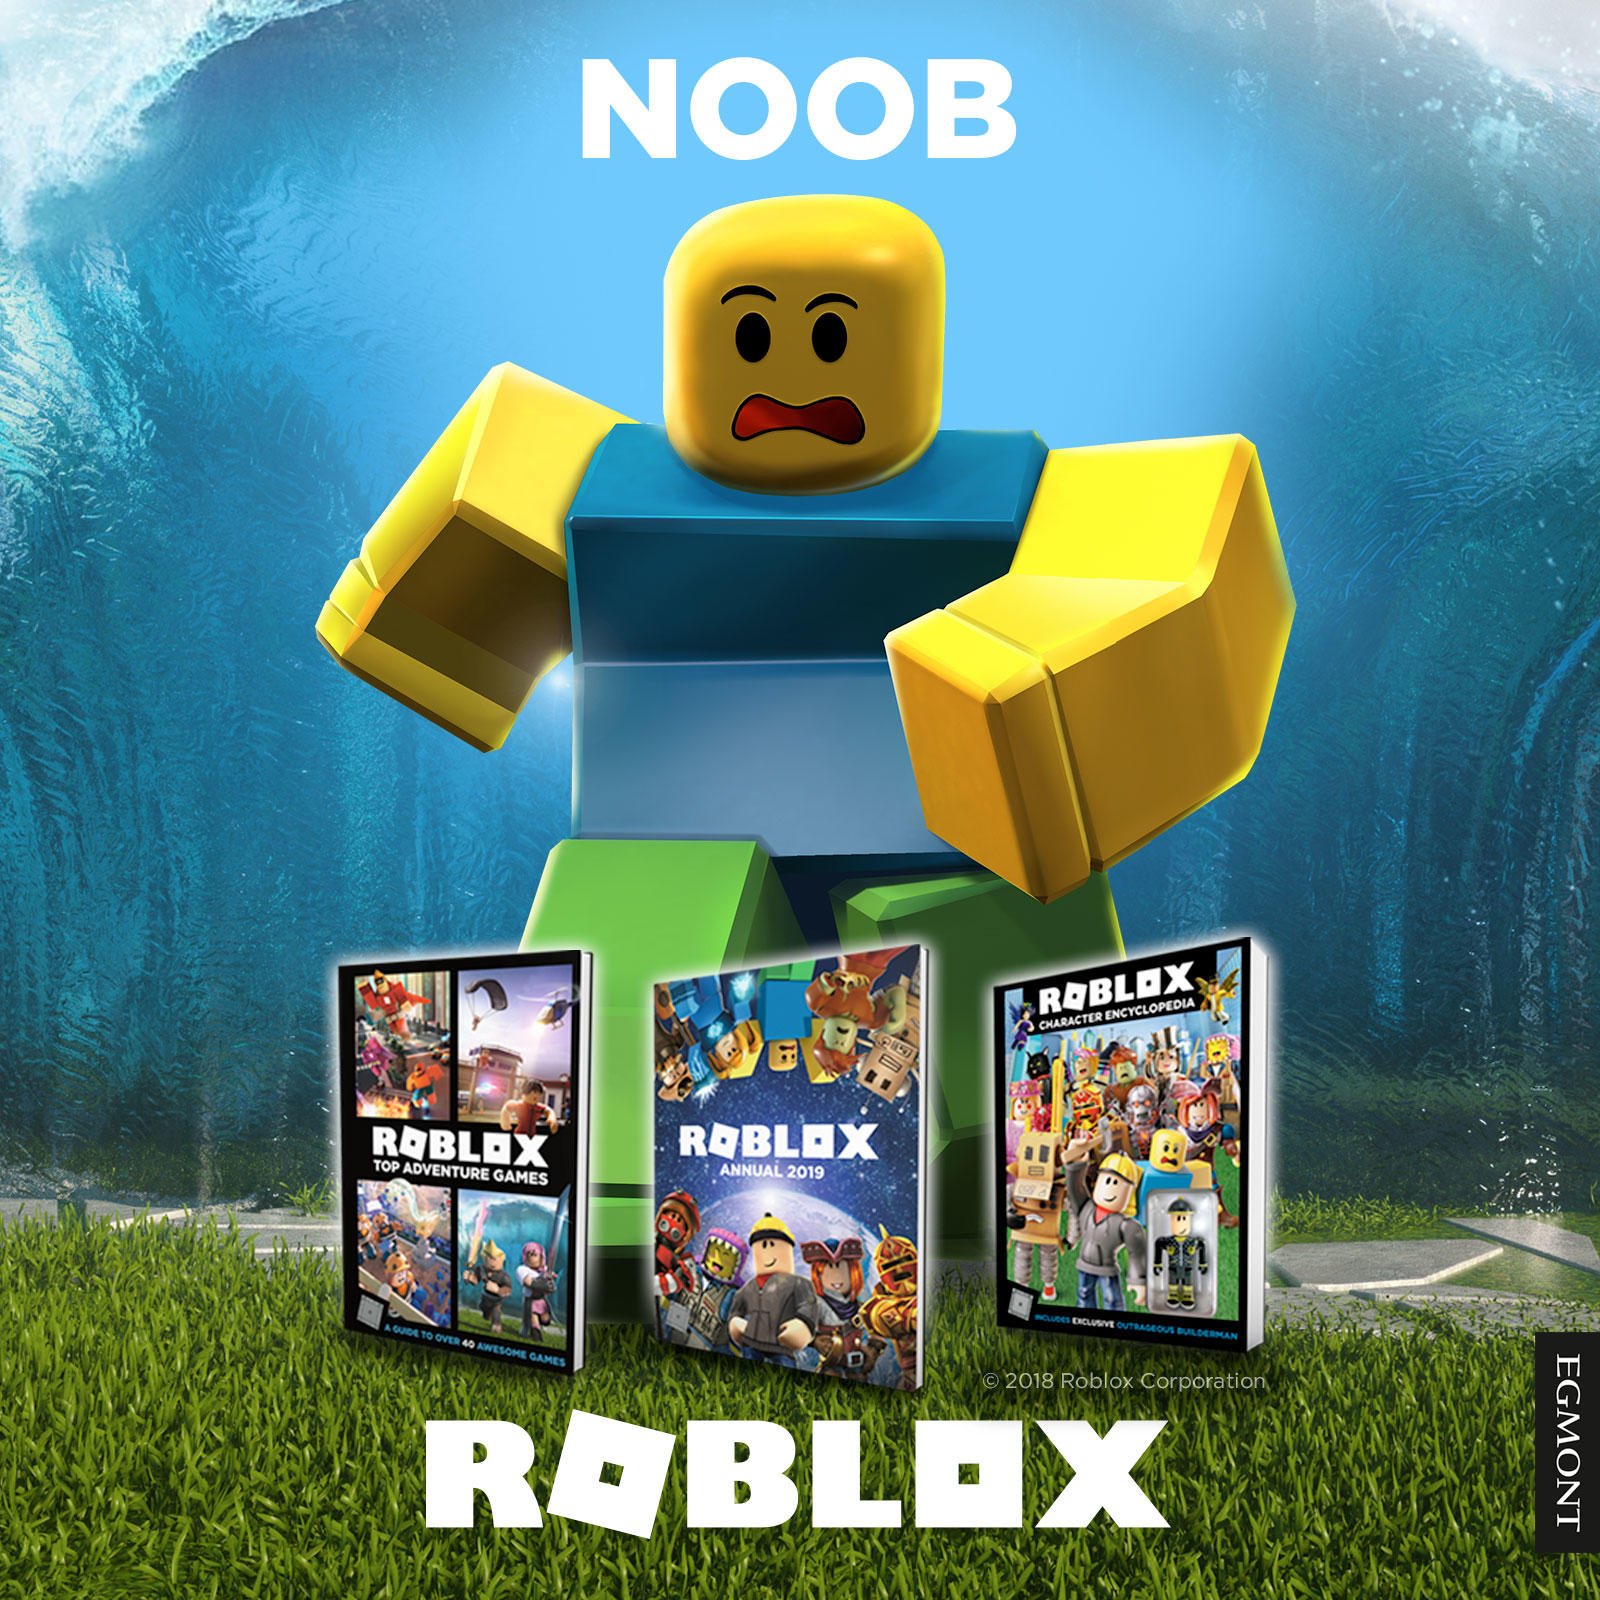 Egmont Booooooooo Ks Uk On Twitter The Wide World Of Roblox In Three Fun Filled Volumes Explore Character Profiles Including Noob Game Stats And The History Of Everyone S Favourite Gaming Community Https T Co 4xv6xrkehp Https T Co - roblox egmont